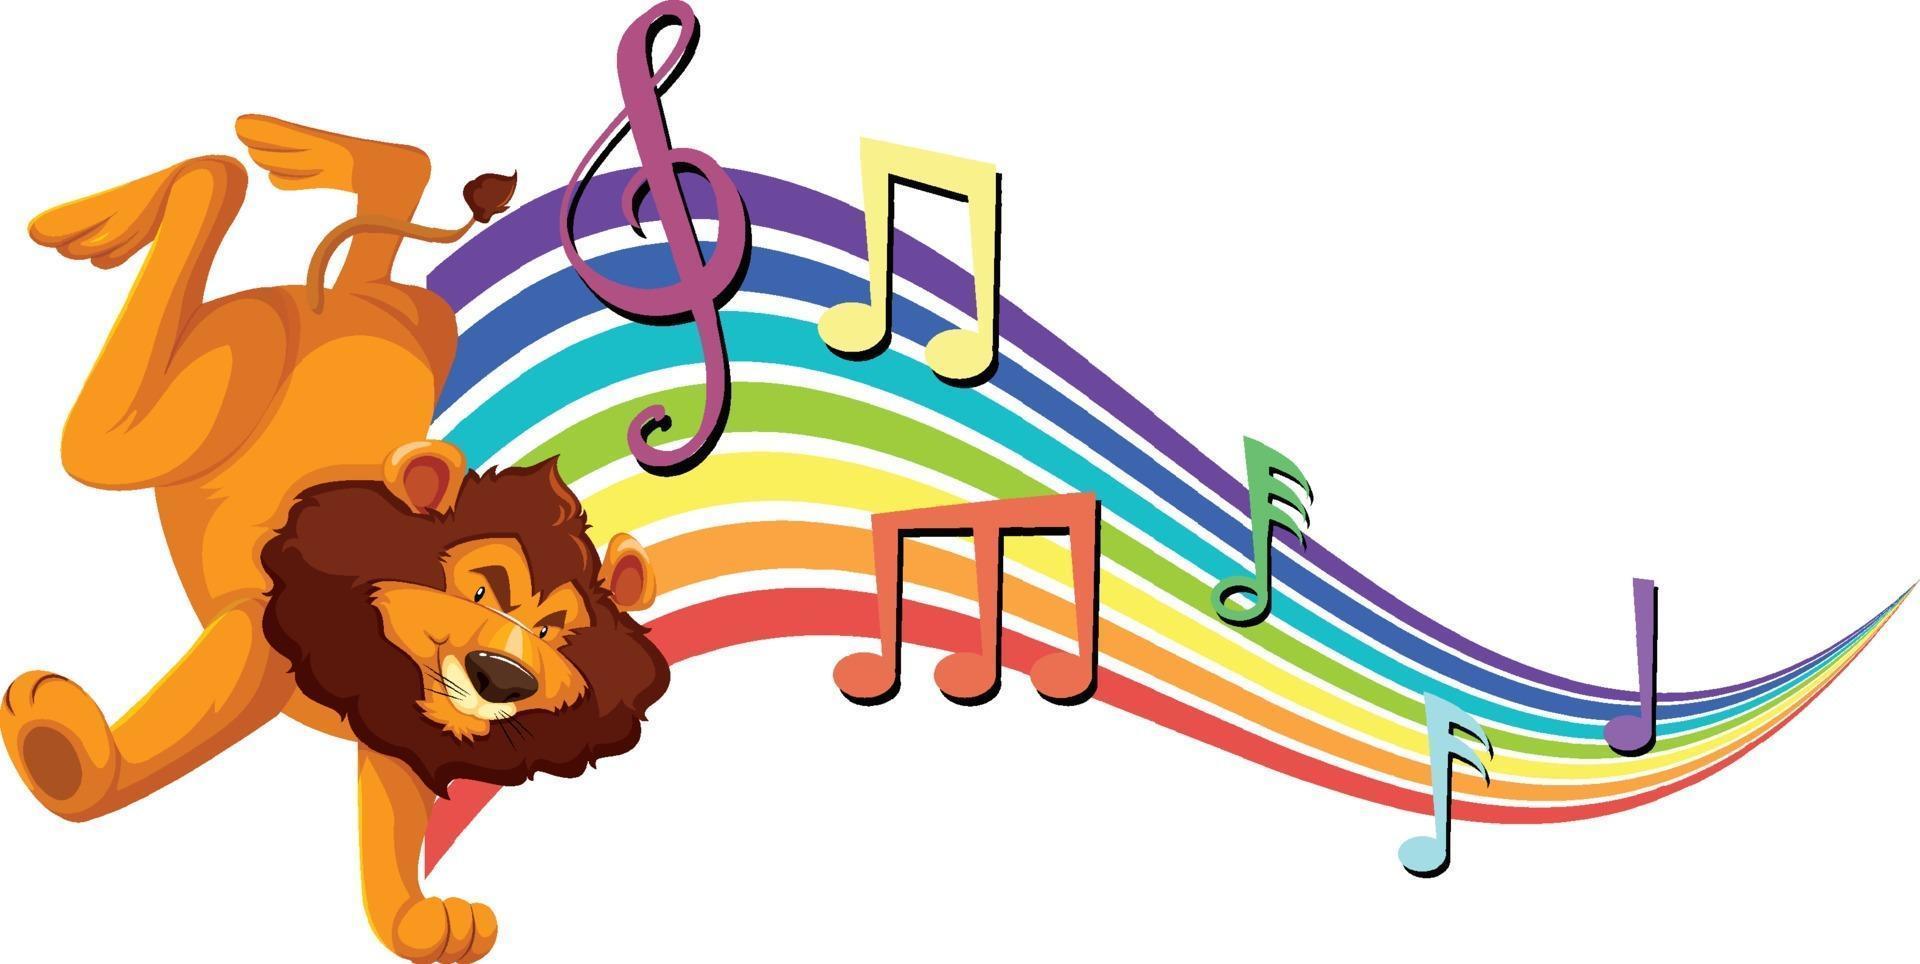 Lion dancing with melody symbols on rainbow vector